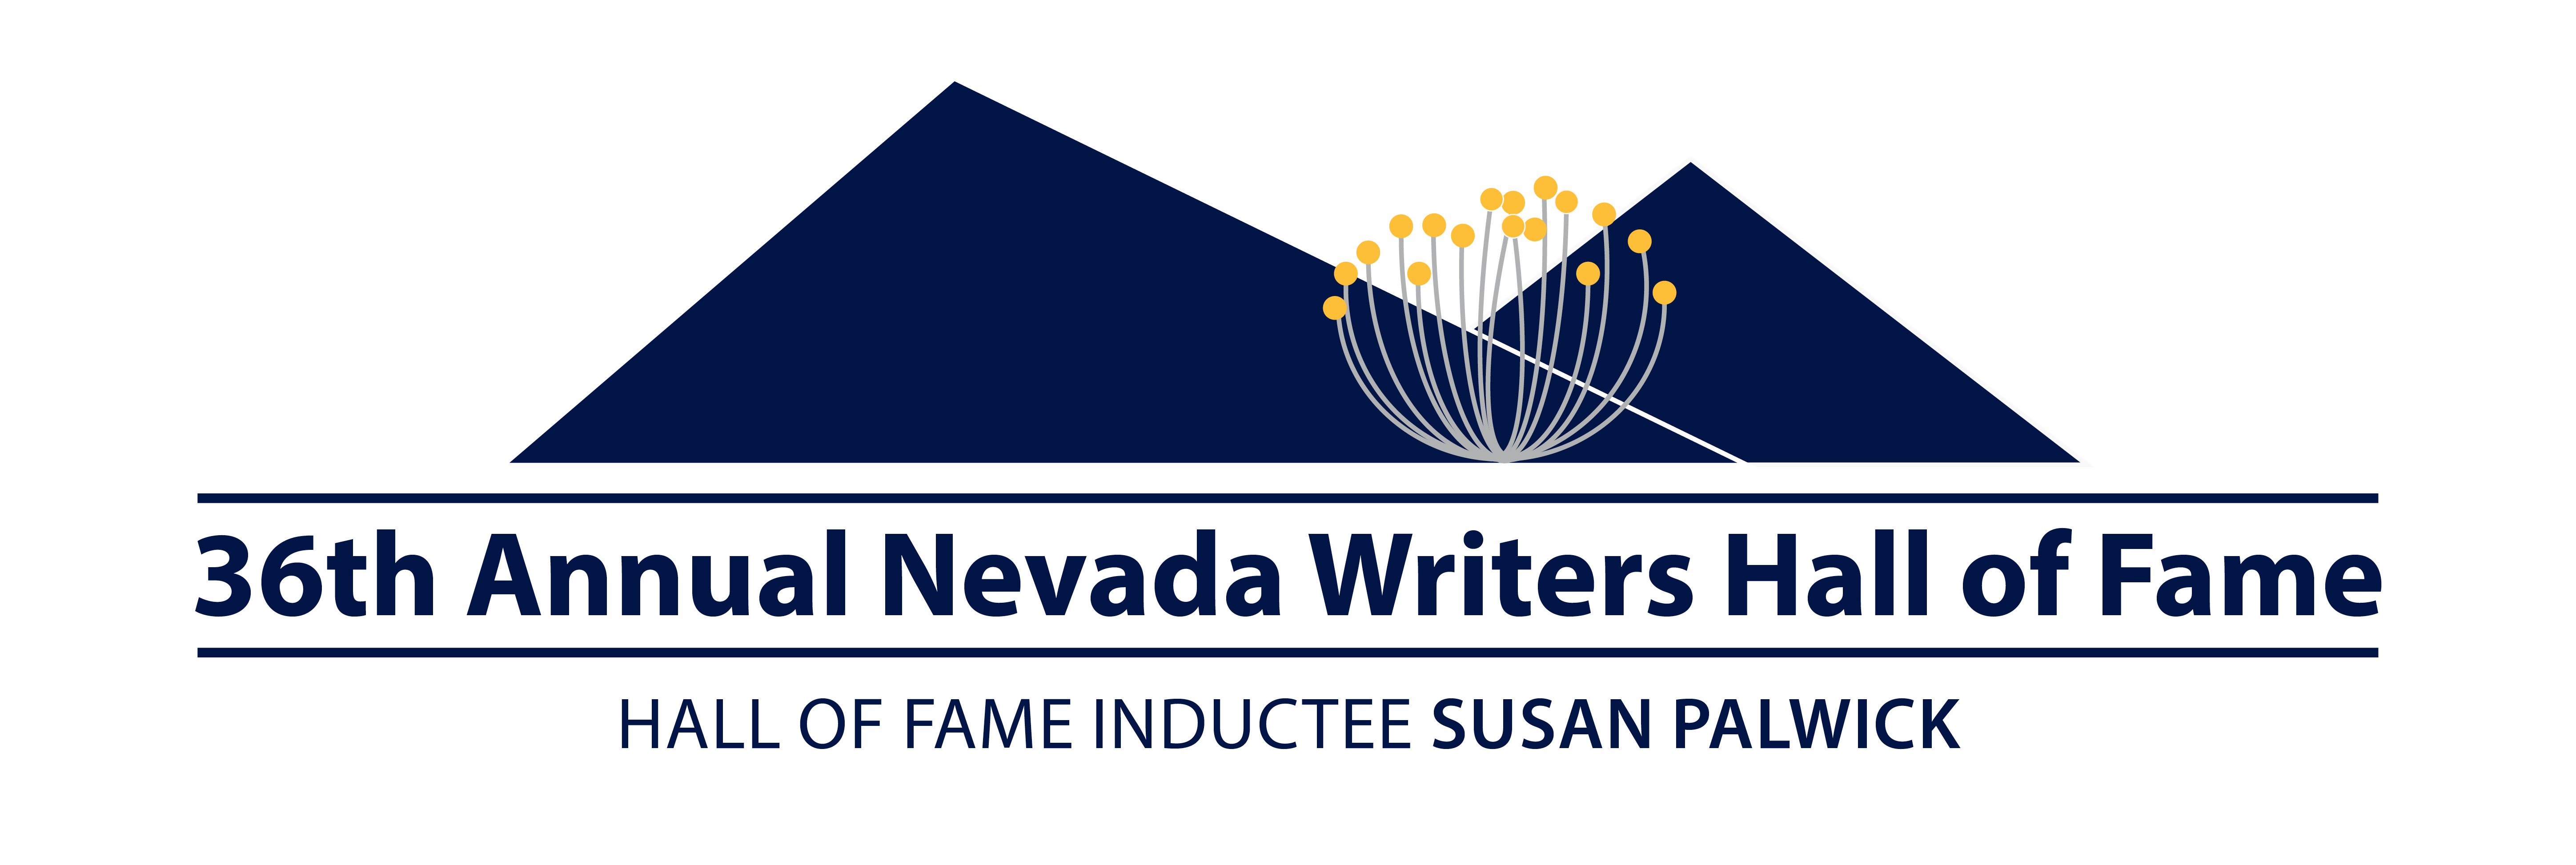 Logo for the 36th Annual Nevada Writers Hall of Fame featuring inductee Susan Palwick.